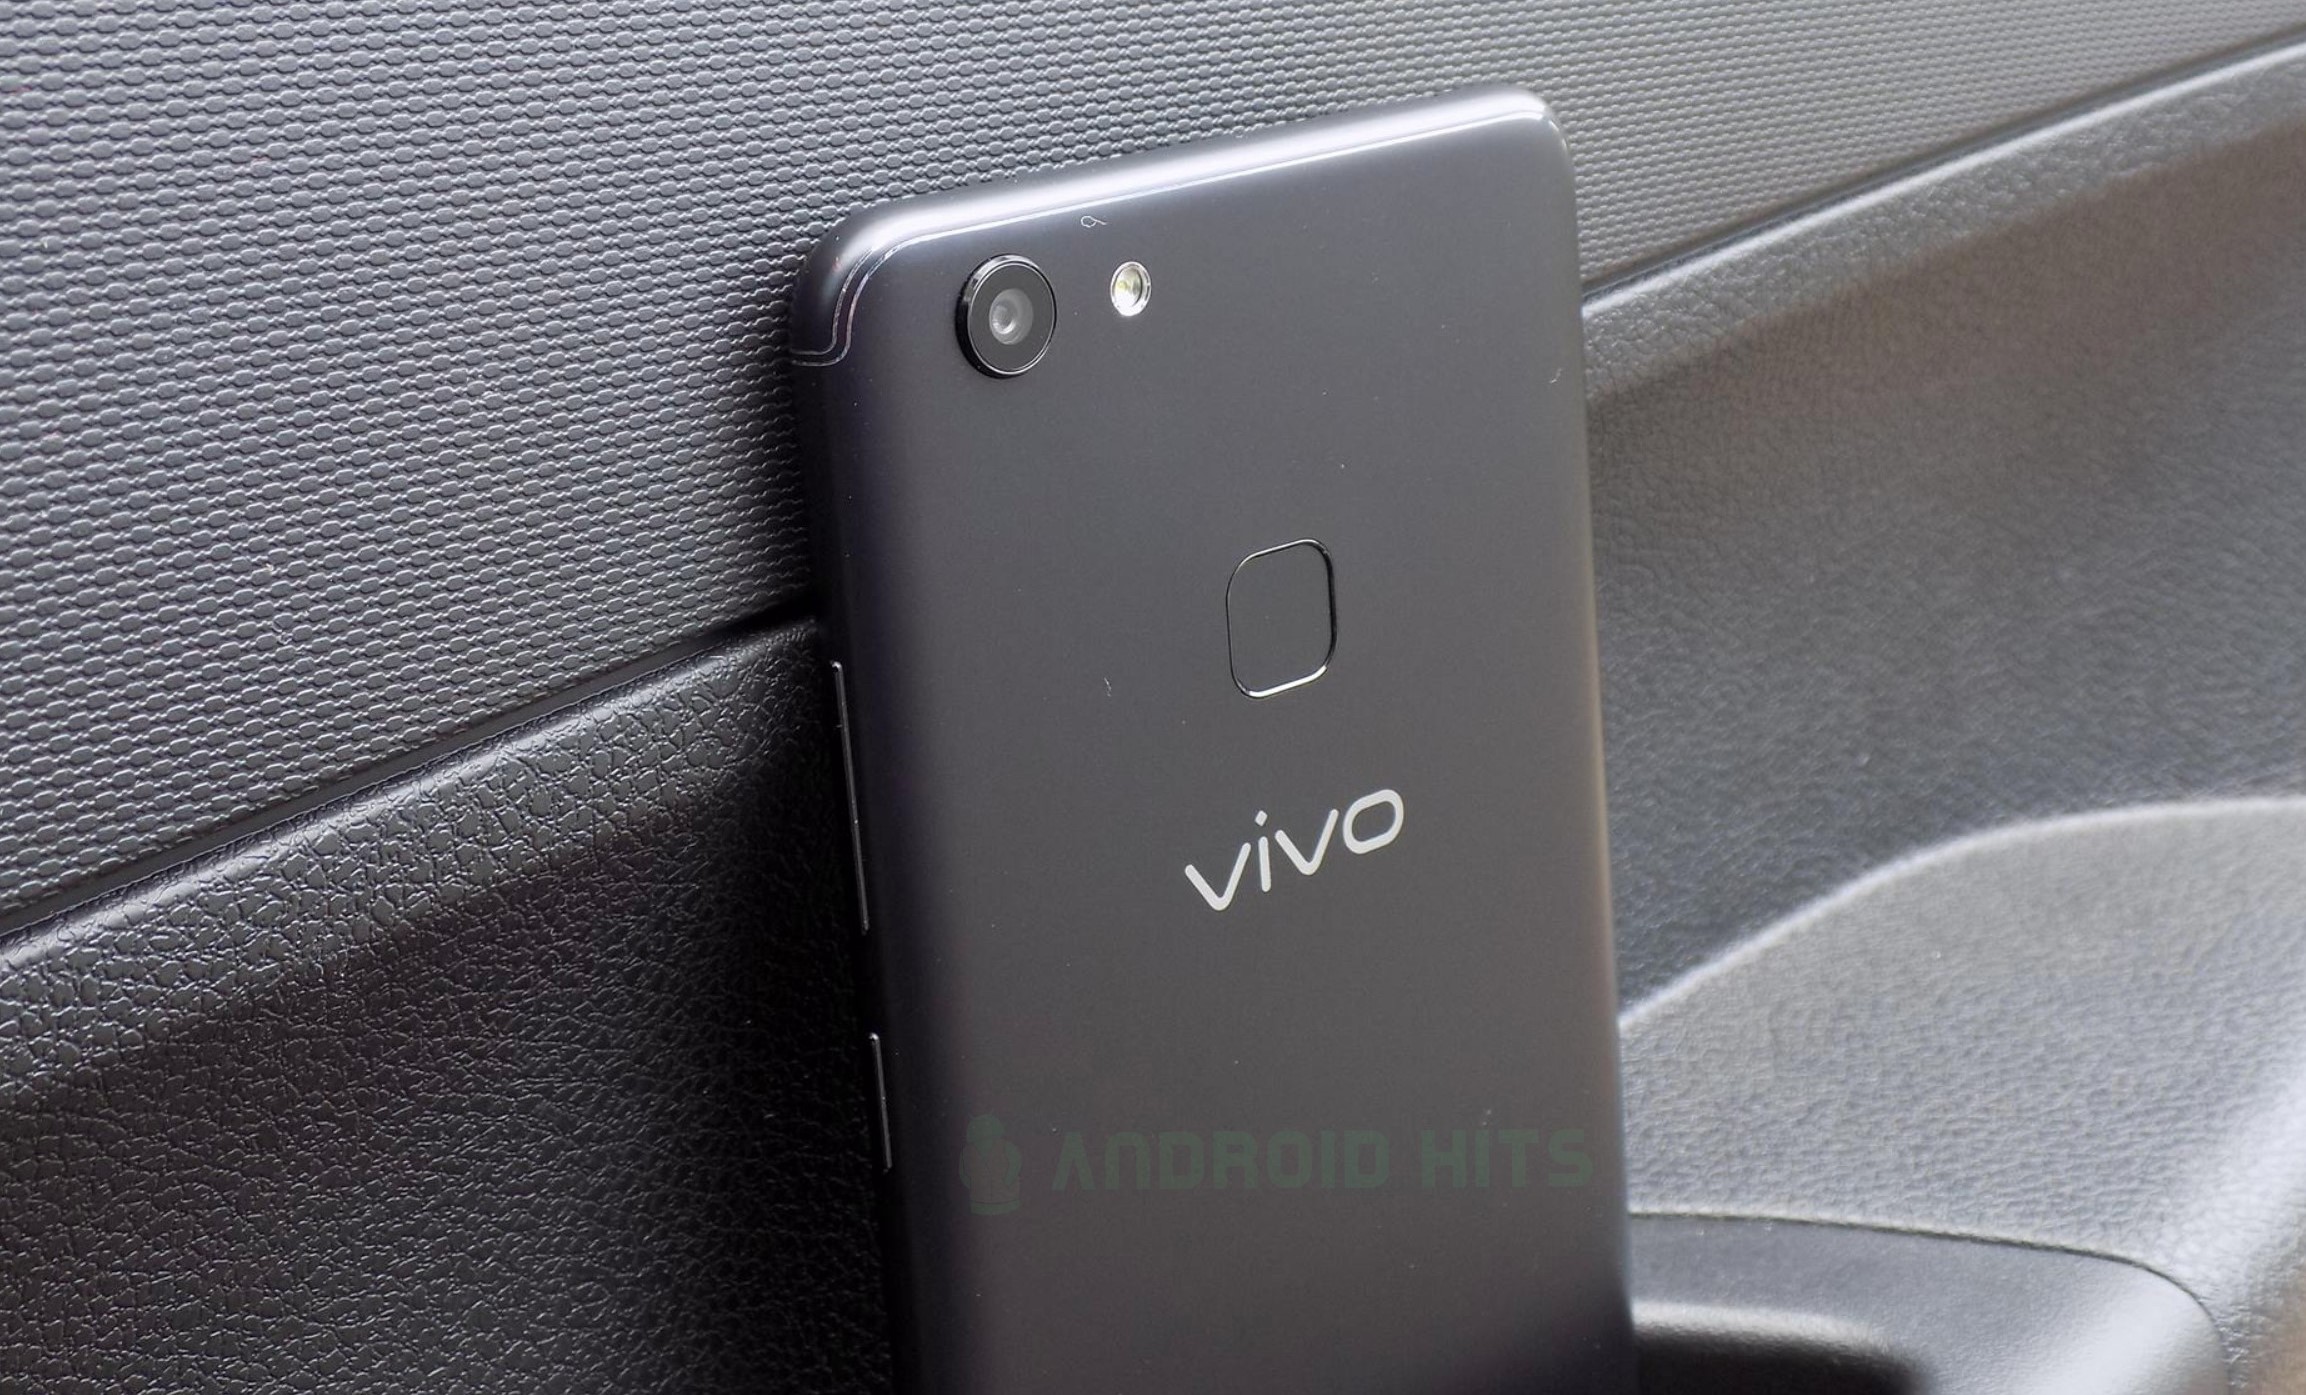 Vivo launches new smartphone V7 Plus in India with 24MP Selfie Cam and 18:9 ratio Screen 3